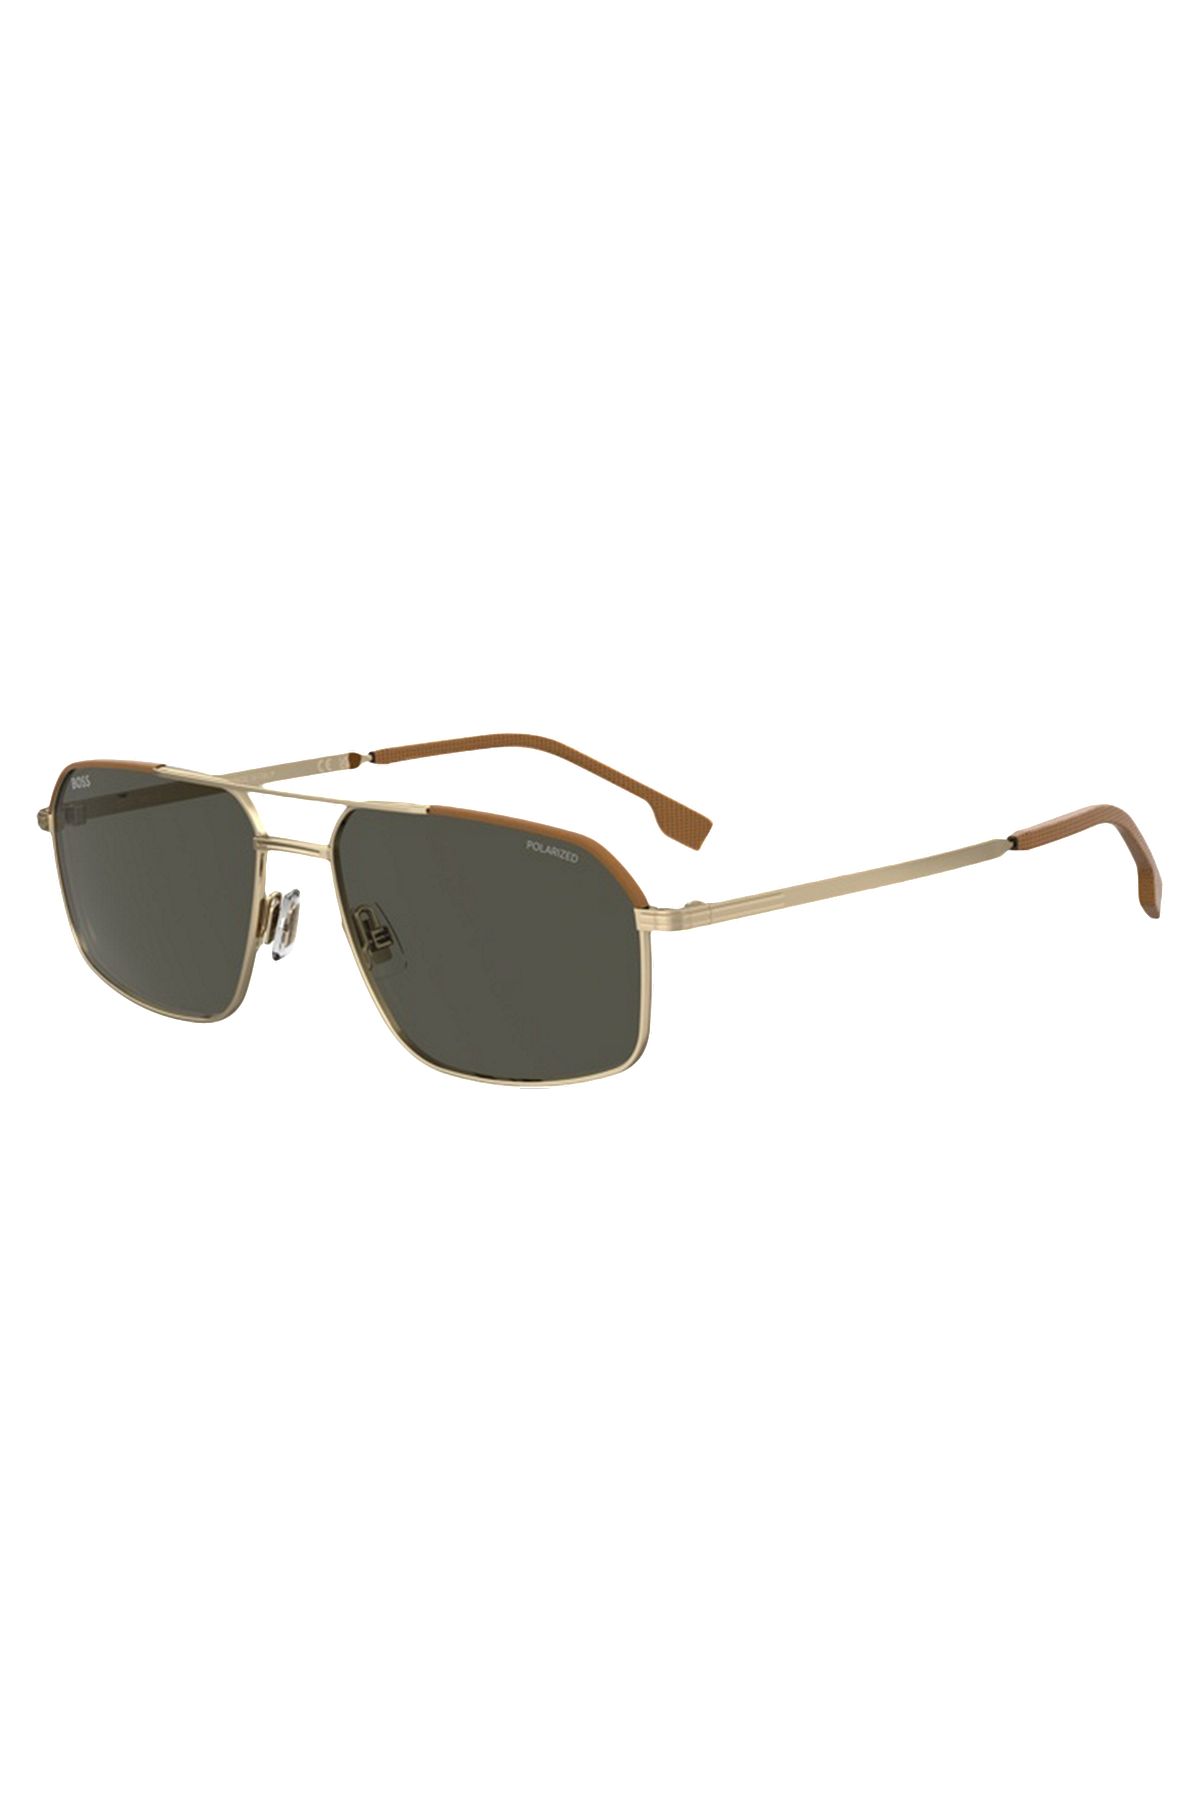 Limited-edition Italian-crafted sunglasses with leather trims, Gold